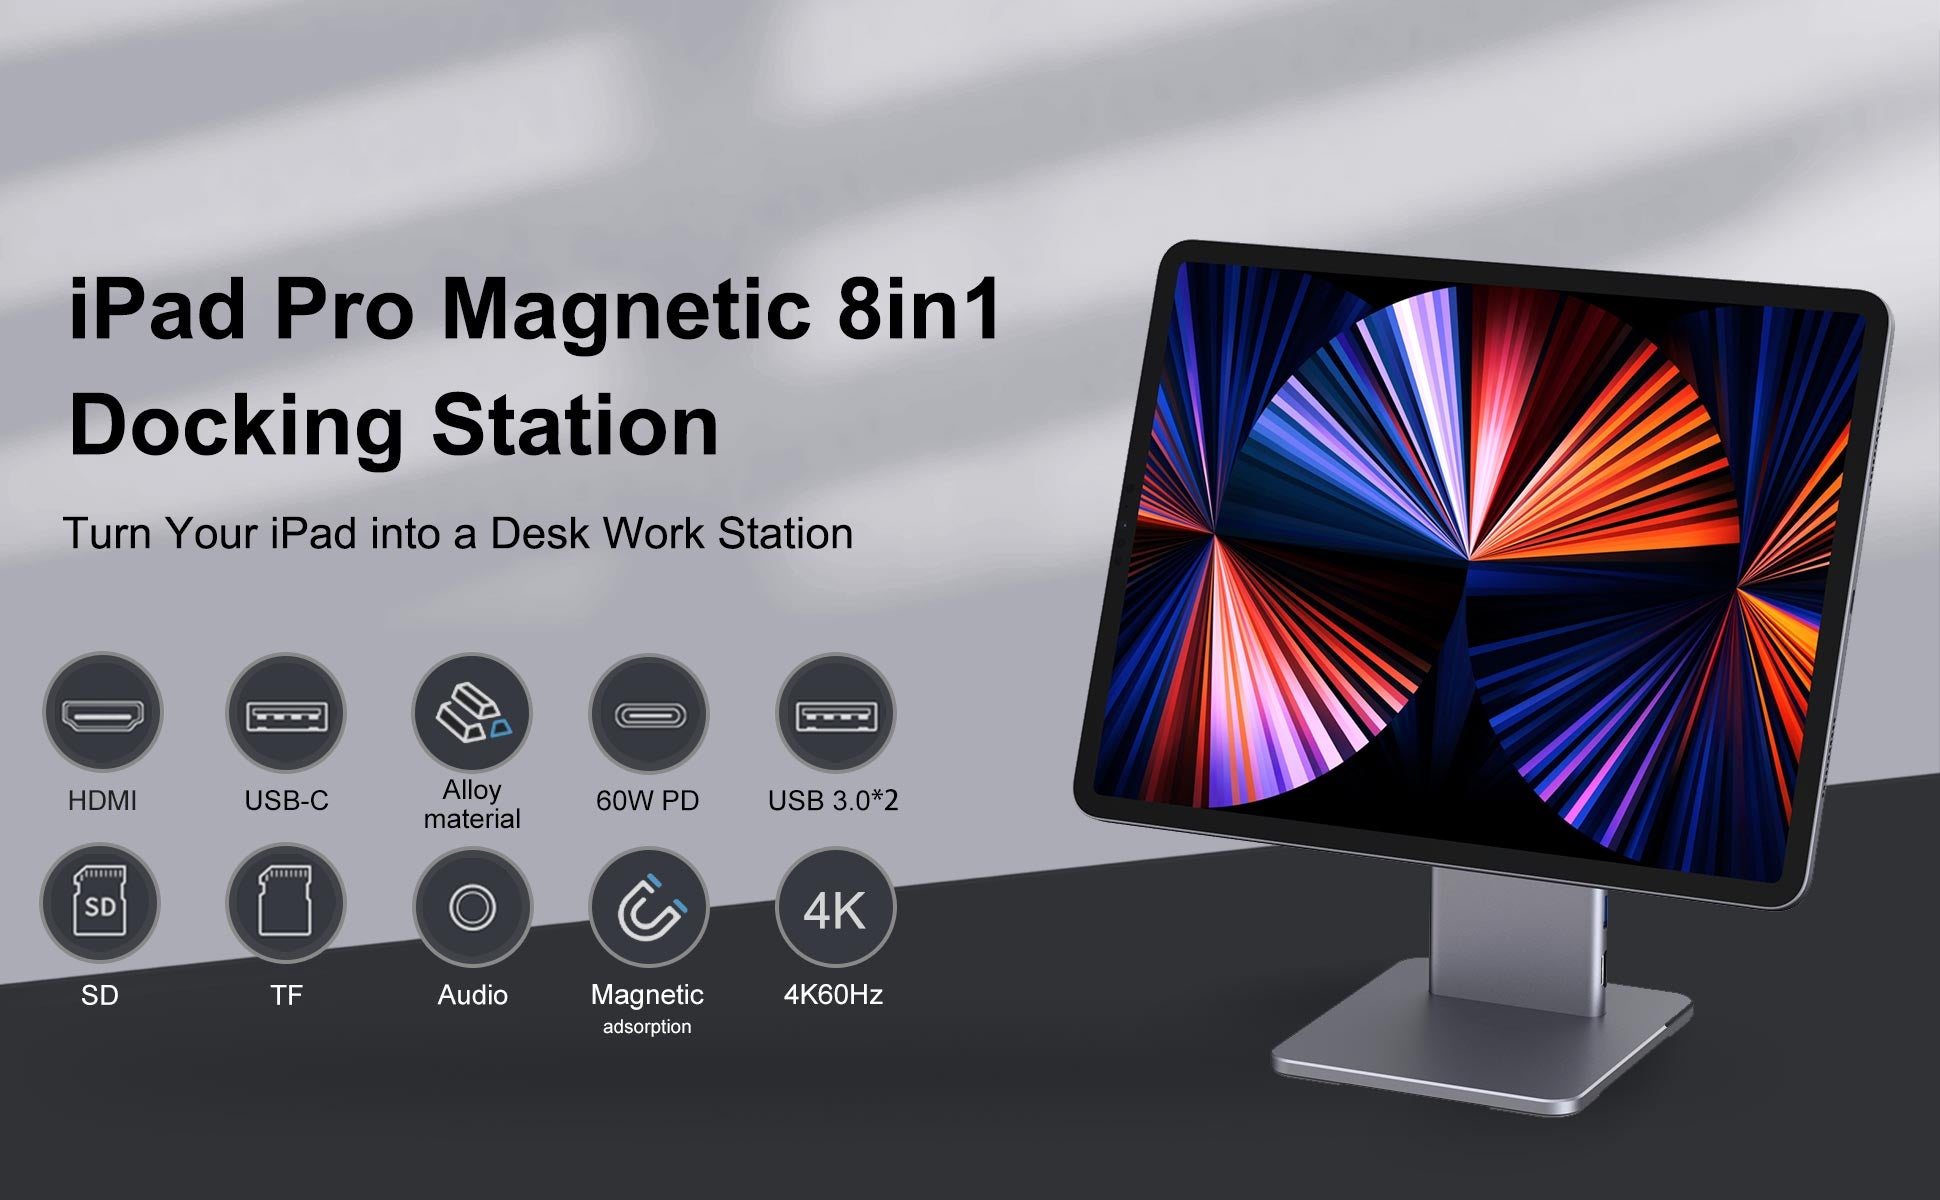 iPad-Pro-Air-Dcoking-station-8in1-hub-stand-with-magnetic-4k60hz-for-M1-M2ipadpro